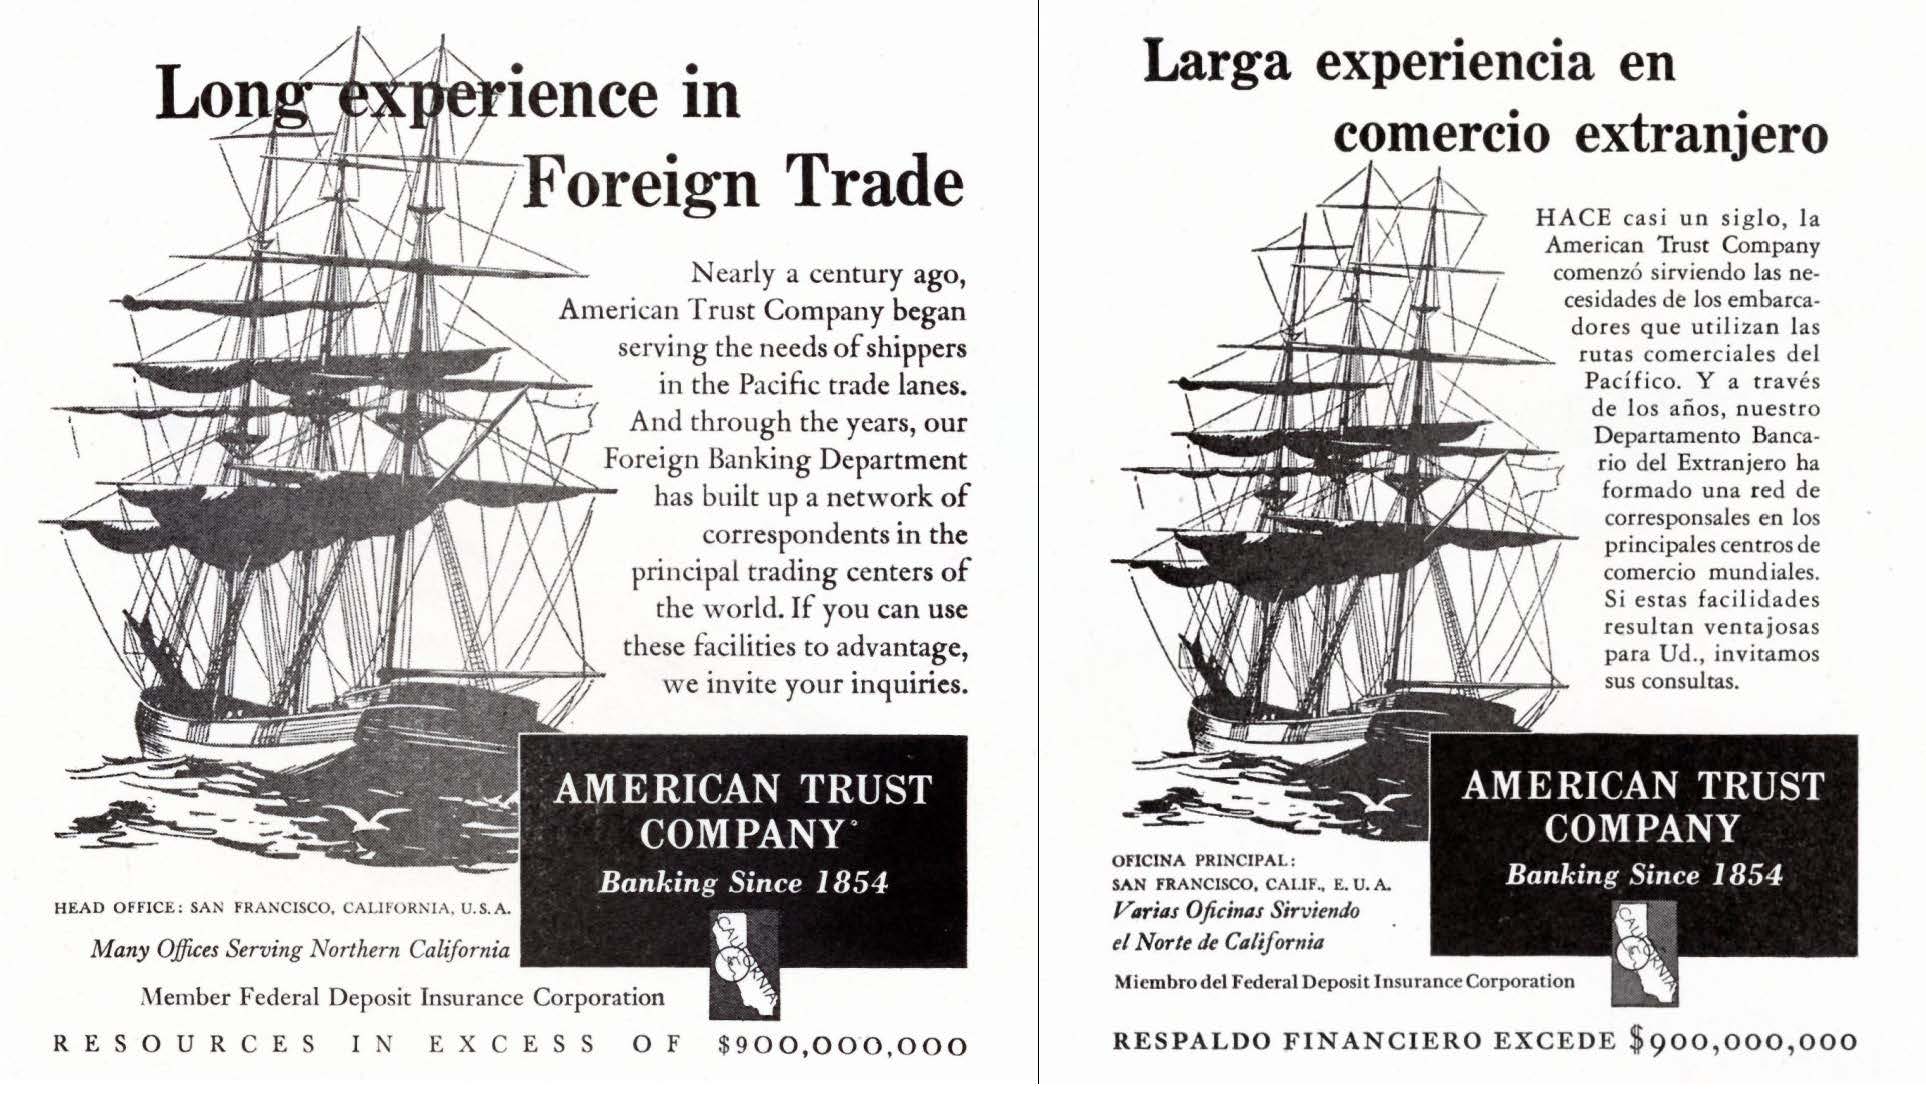 On left, advertisement in English for American Trust Company featuring a ship. On right, Spanish translation of the same ad.